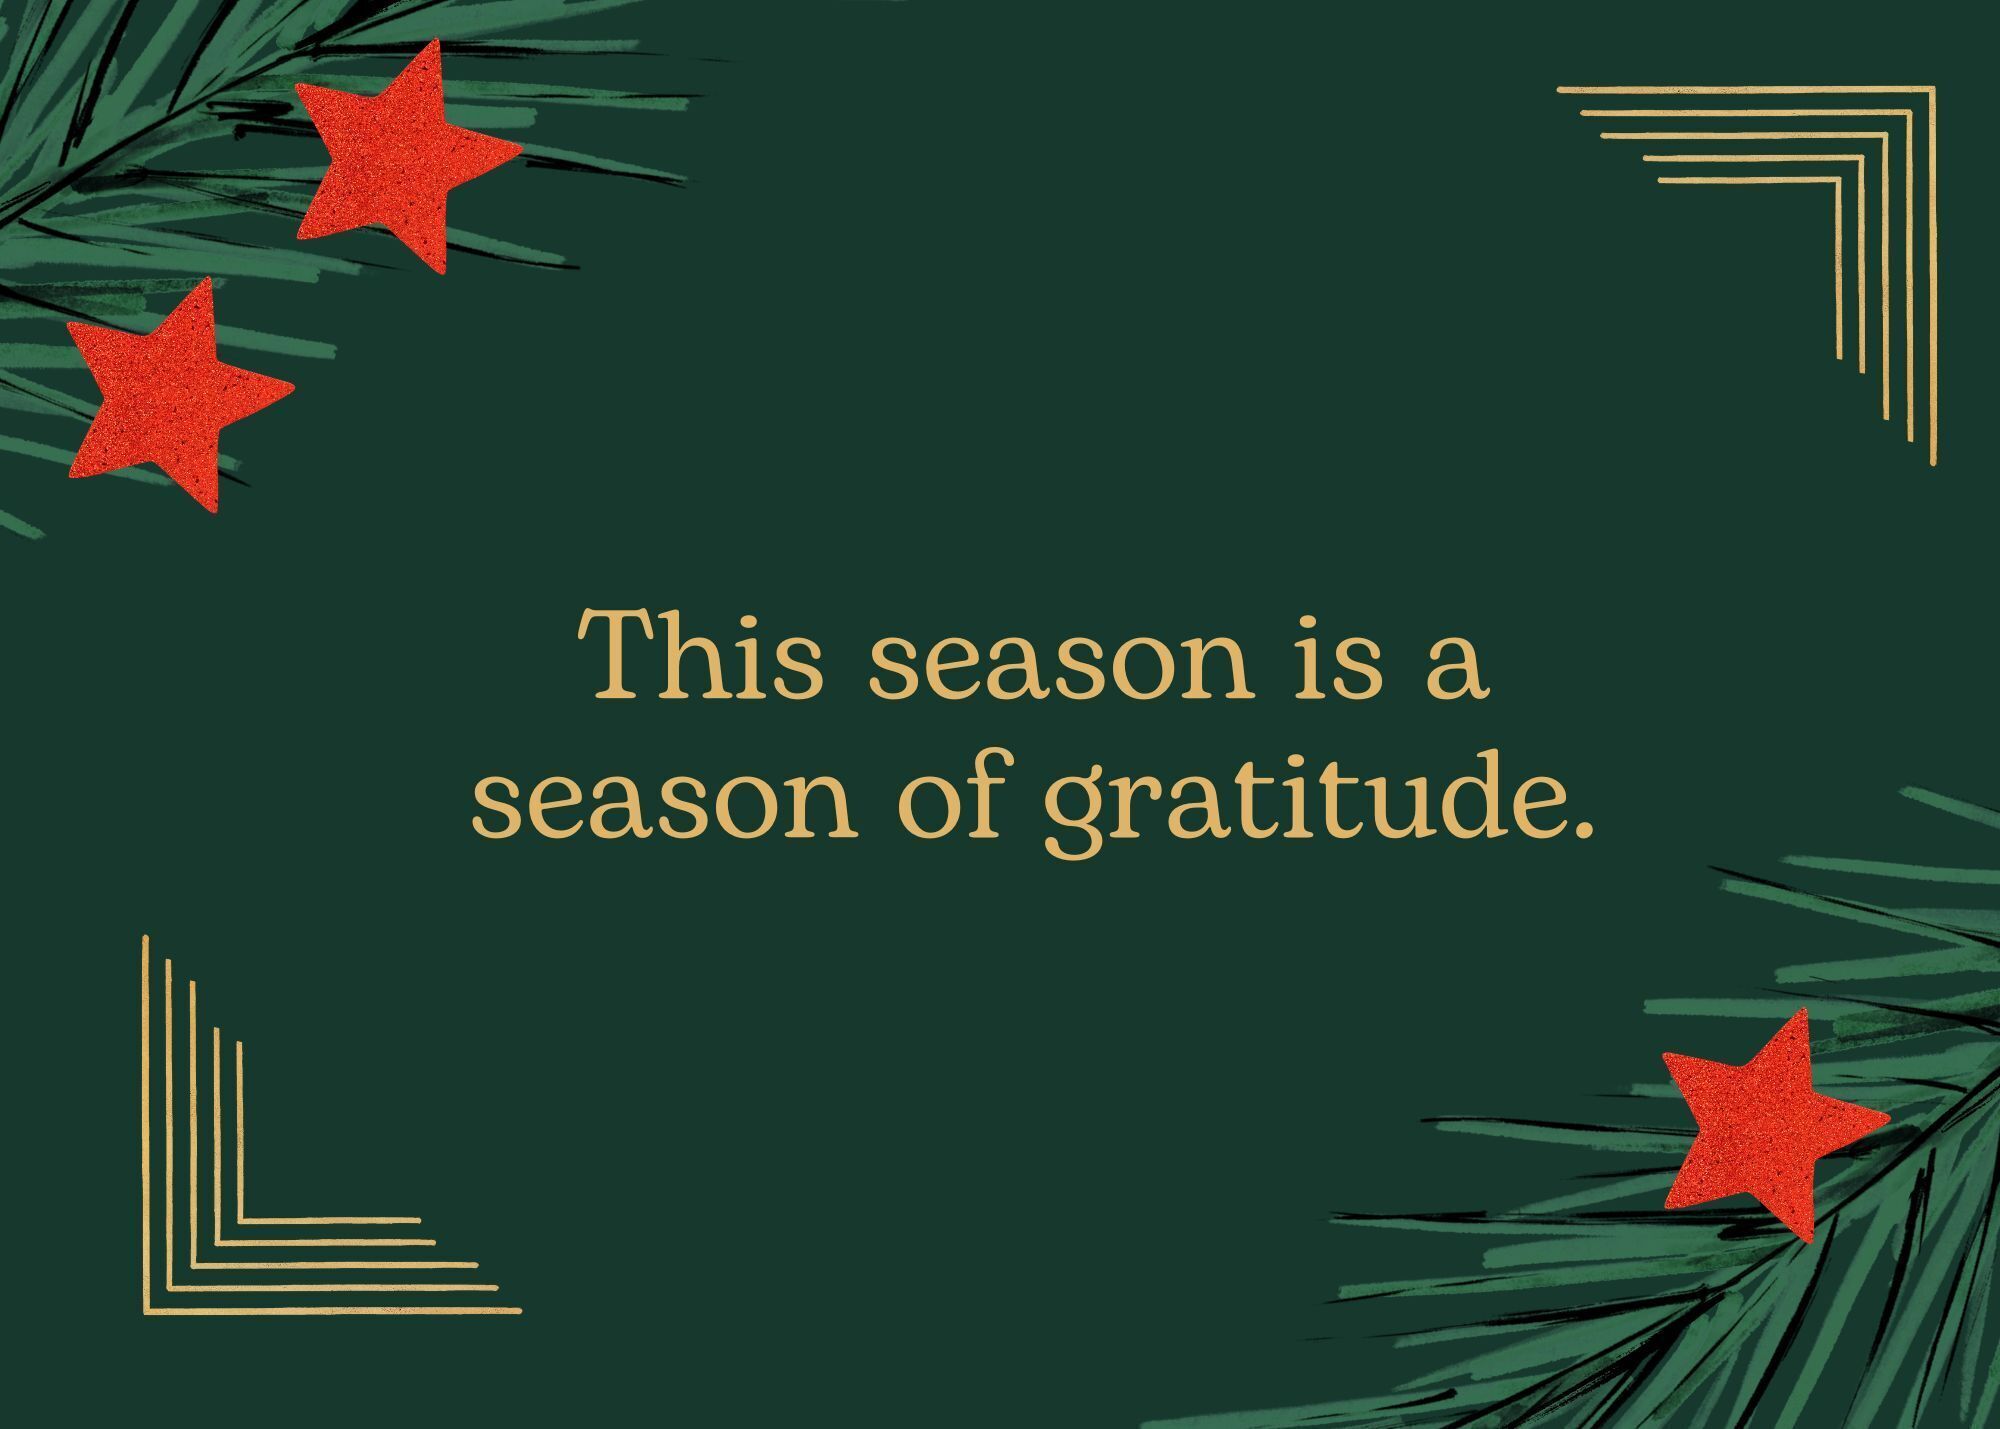 This Season is a Season of Gratitude - We Share Why!